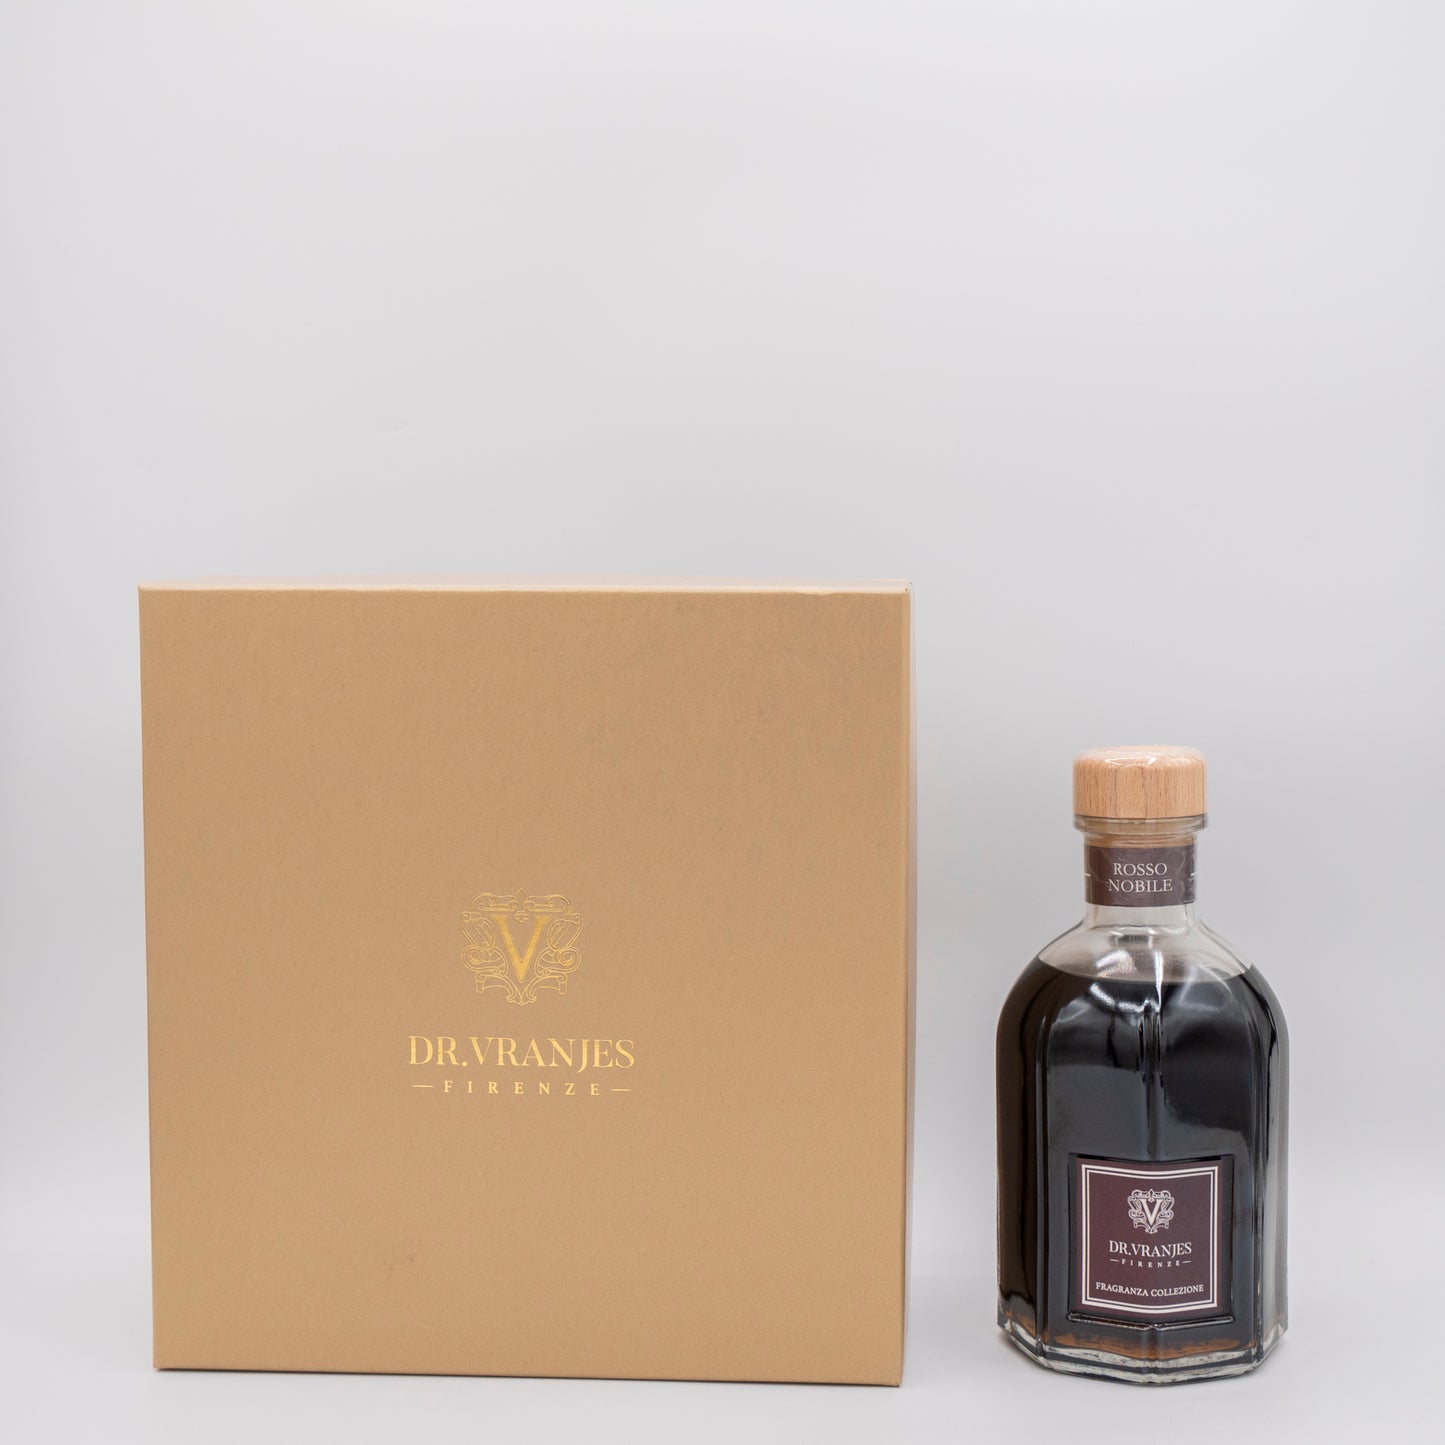 Dr.Vranjes - Gift Box Rosso Nobile 500ml with a "Christmas Star" Decoration